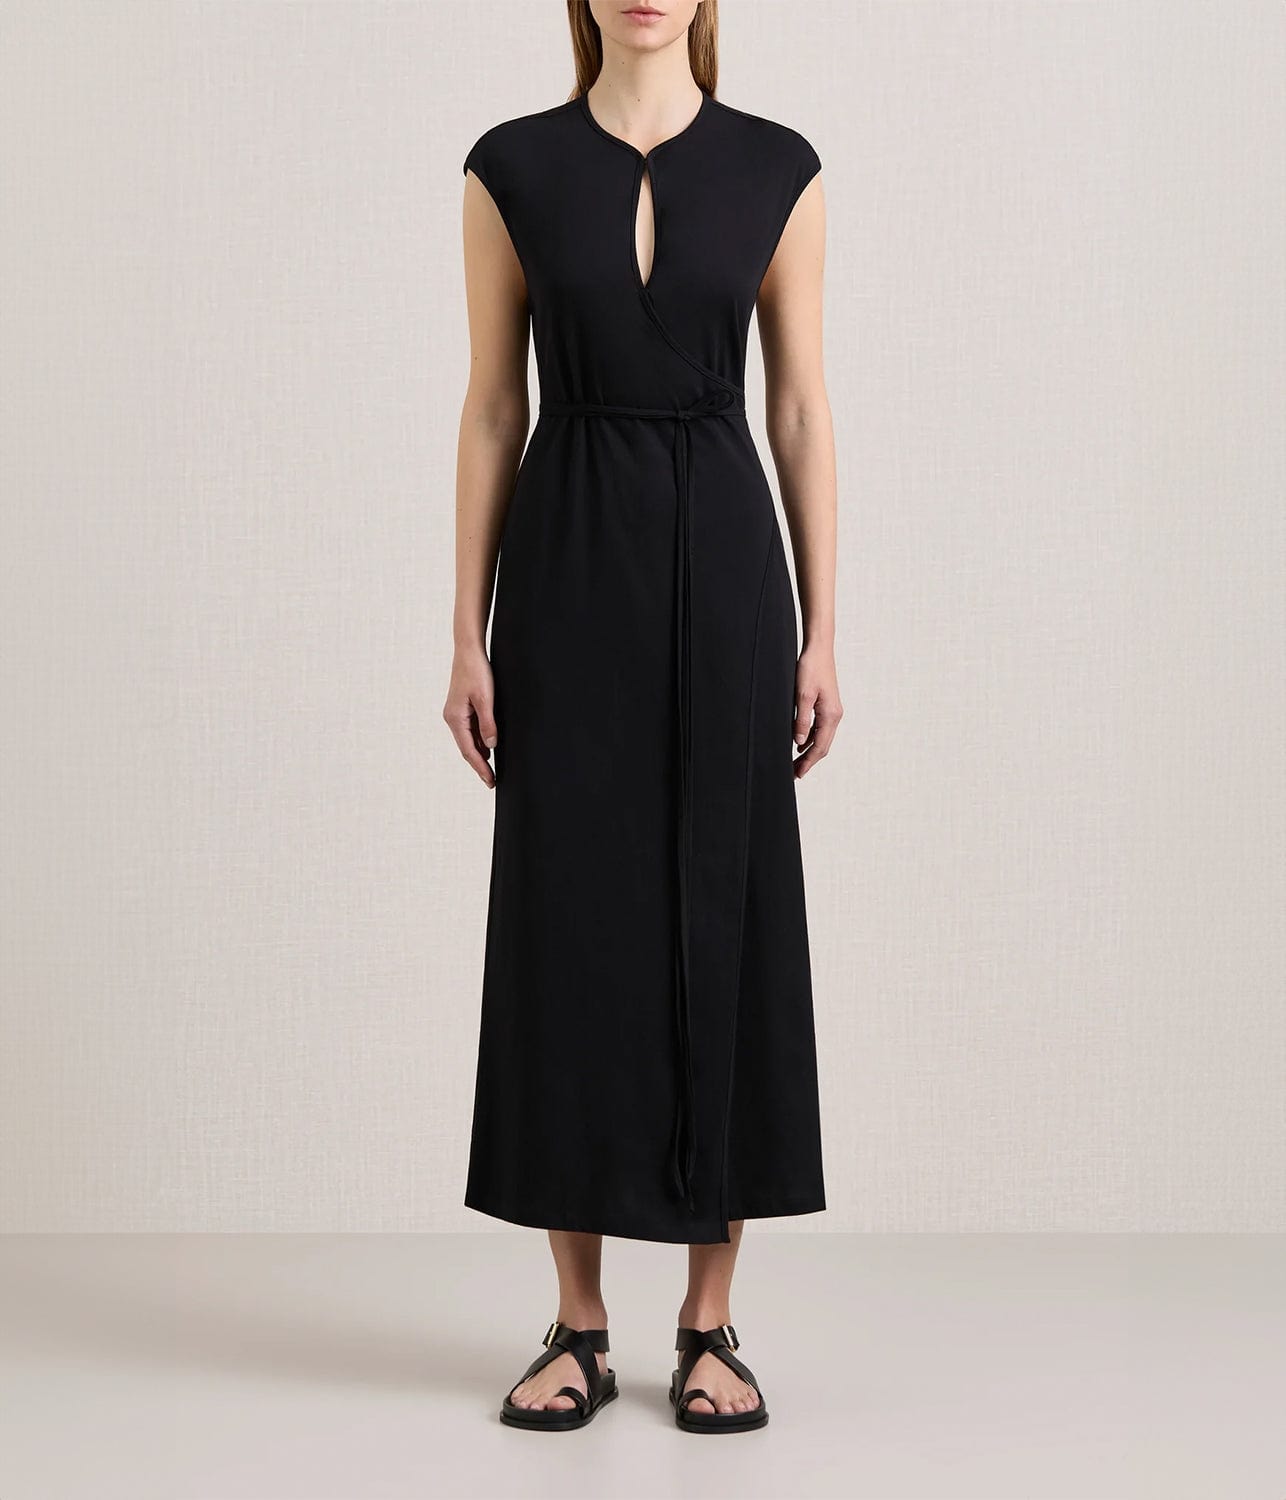 THE LEIGH JERSEY DRESS-  BLACK | A.EMERY |  A.EMERY THE LEIGH JERSEY DRESS-  BLACK